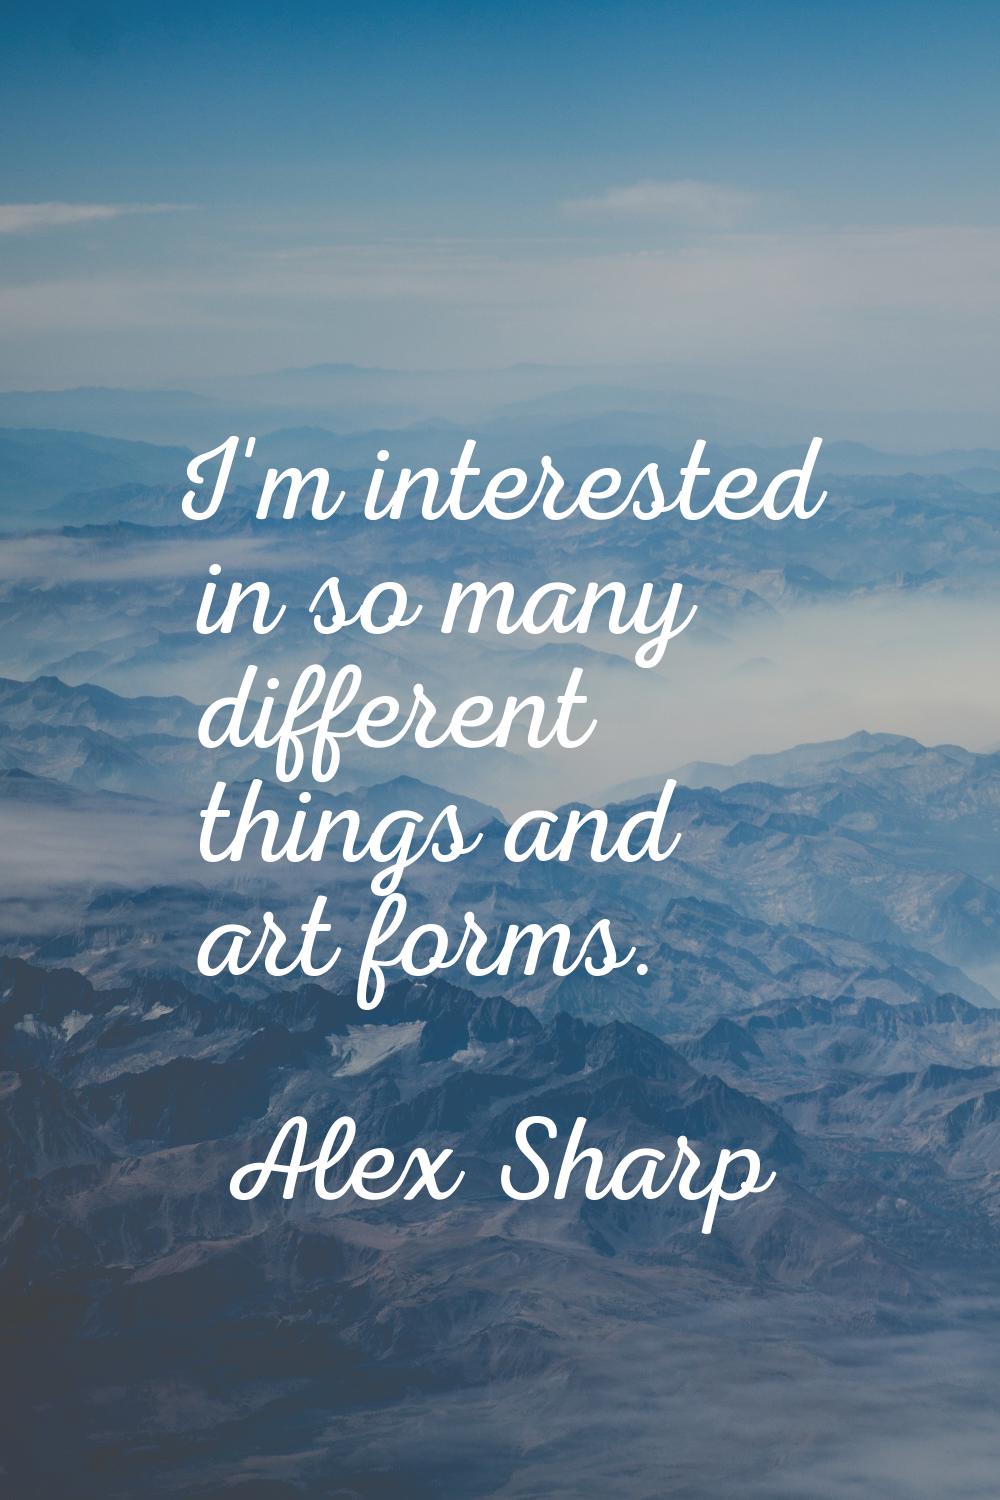 I'm interested in so many different things and art forms.